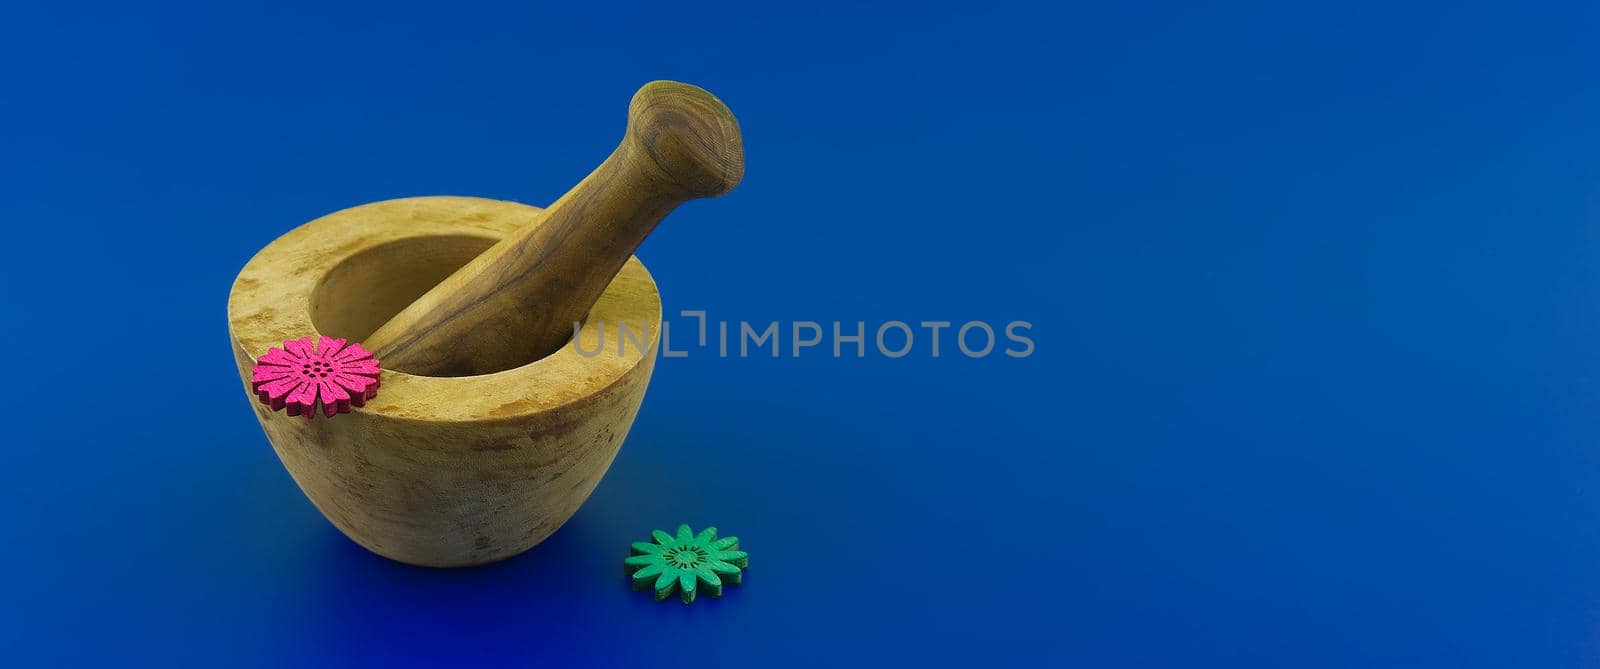 Wooden rustic style mortar and pestle. Spices and herb grinder over blue background with free space for text